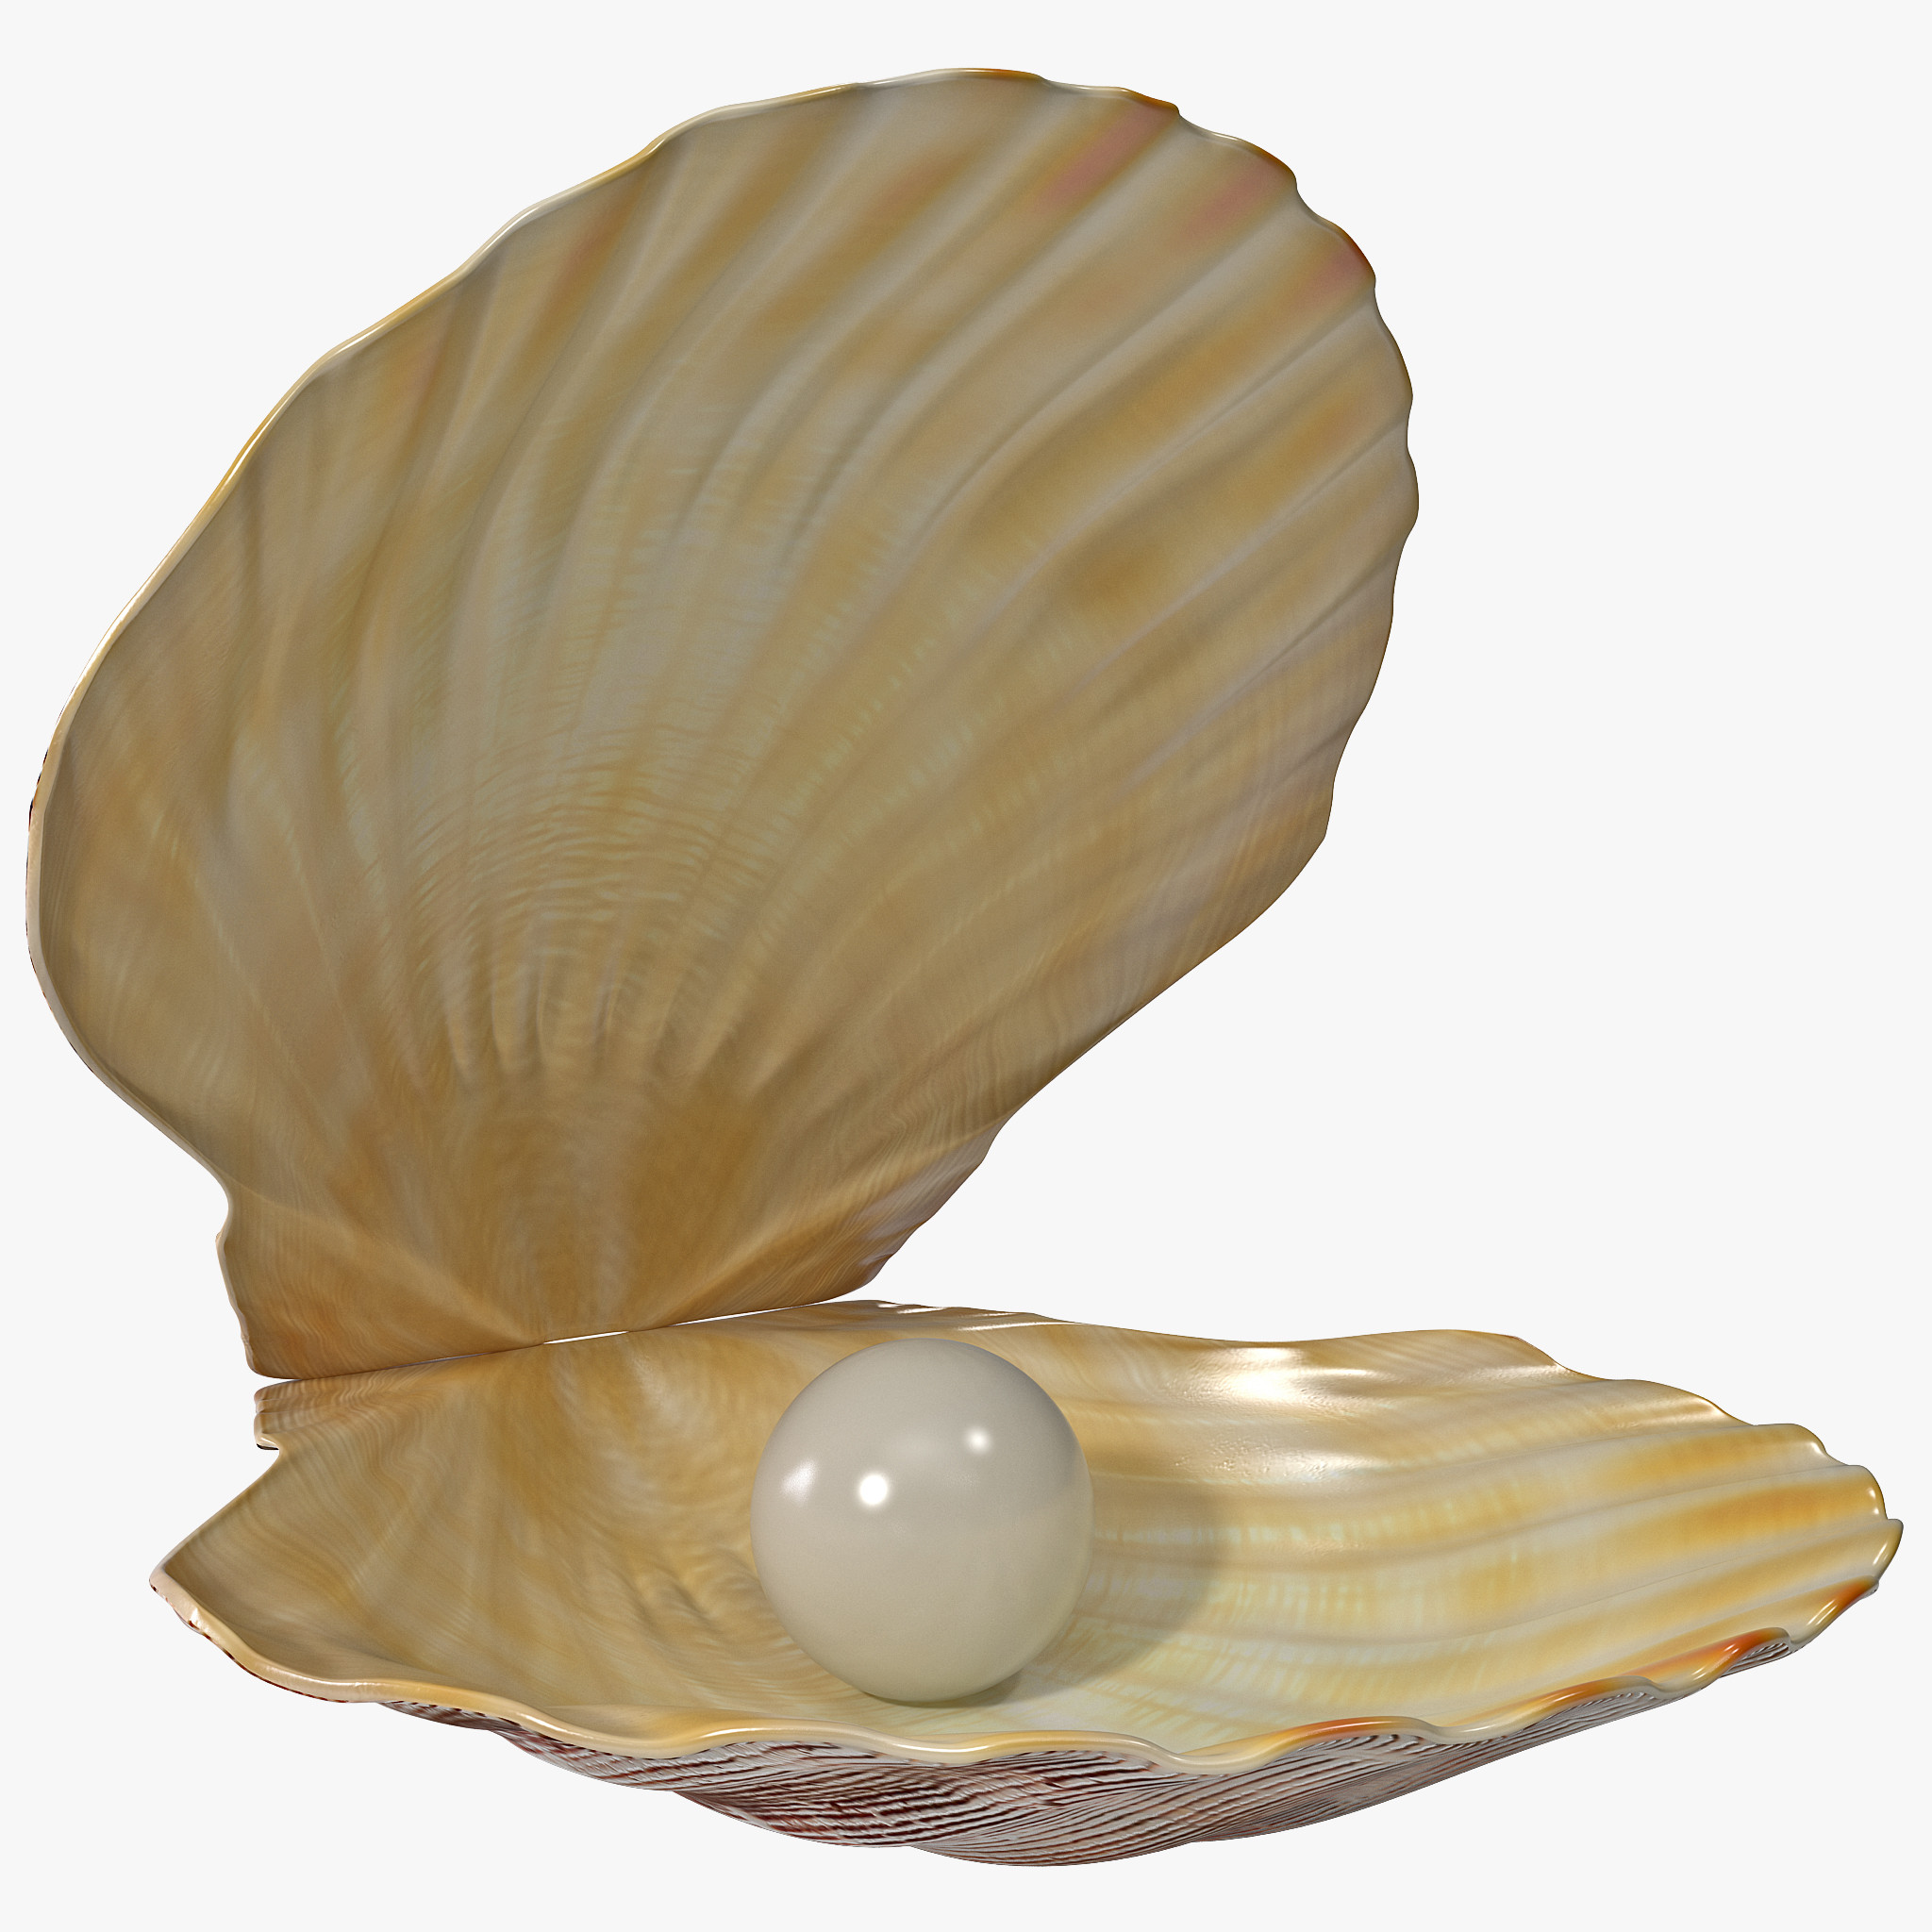 Open Oyster PNG-PlusPNG.com-4